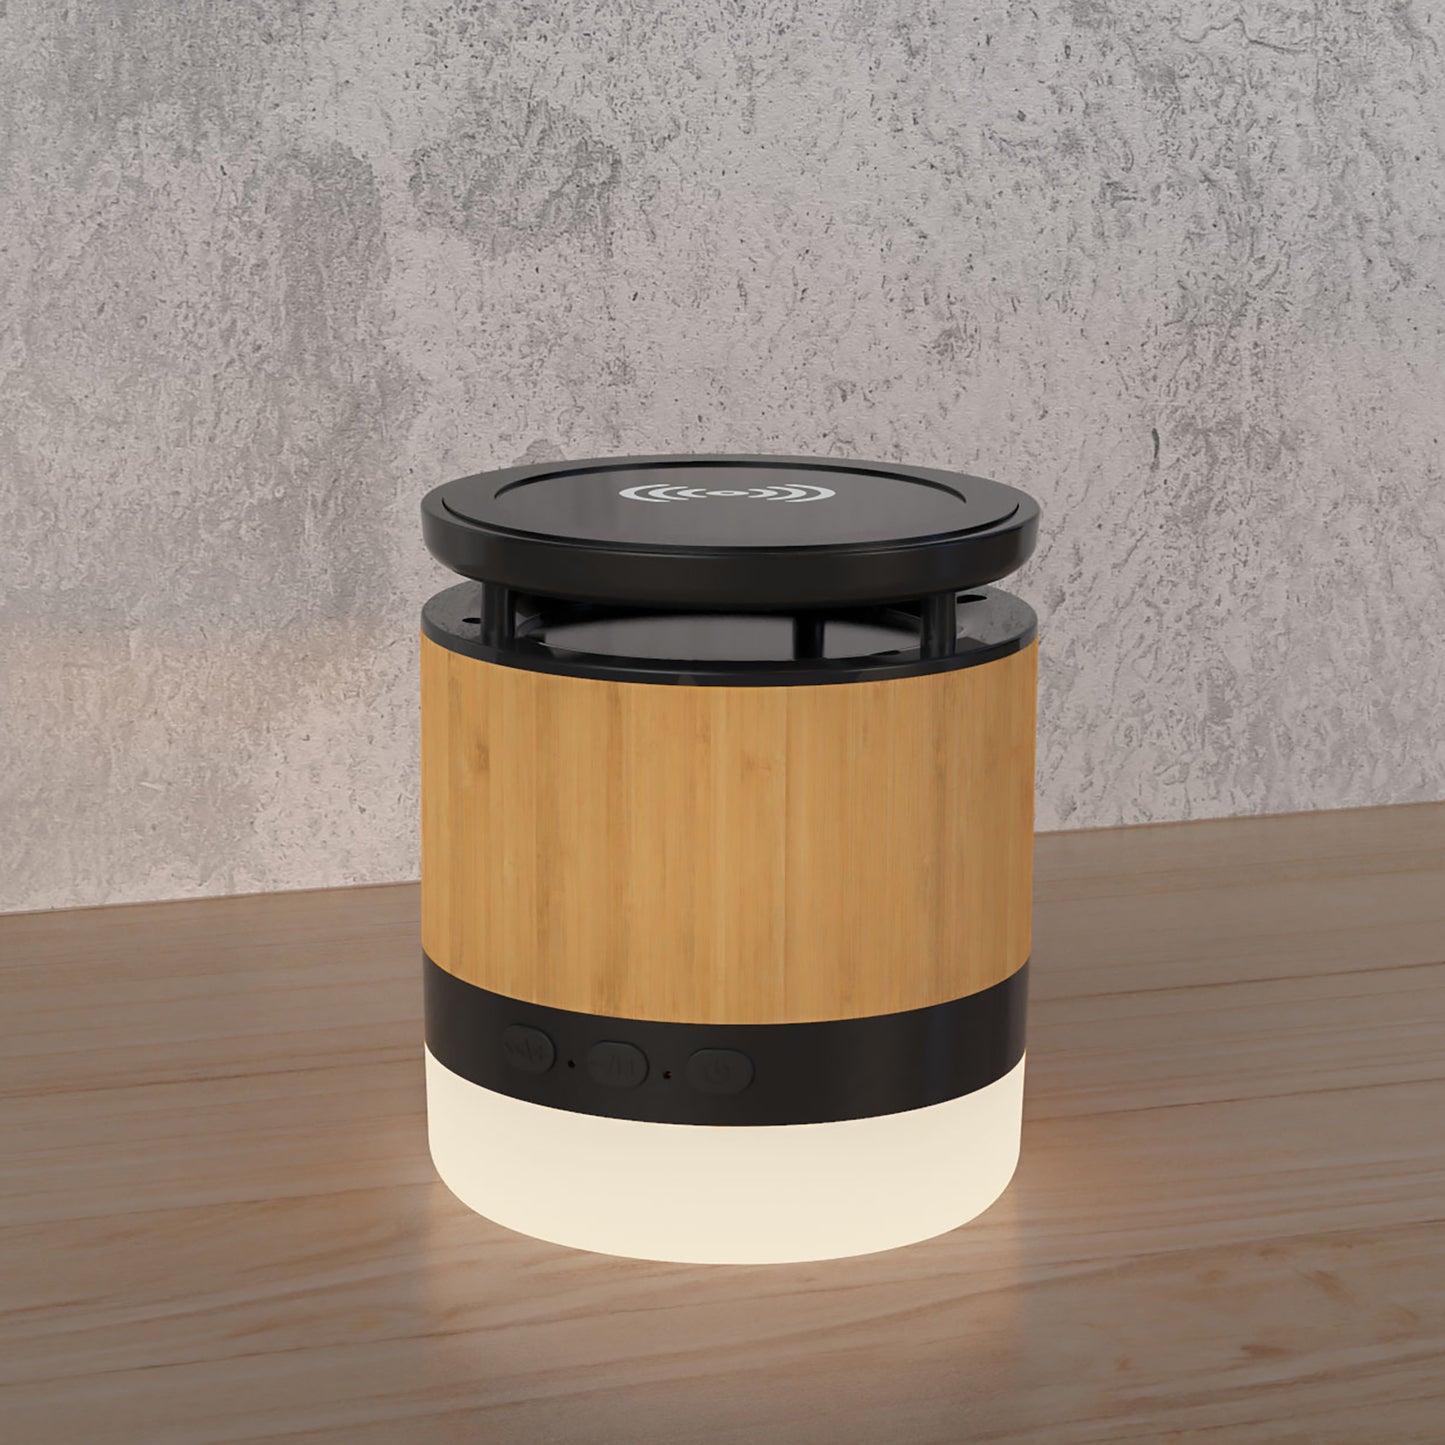 Wooden Bamboo Portable Mini Wireless Charger with LED Light, Black